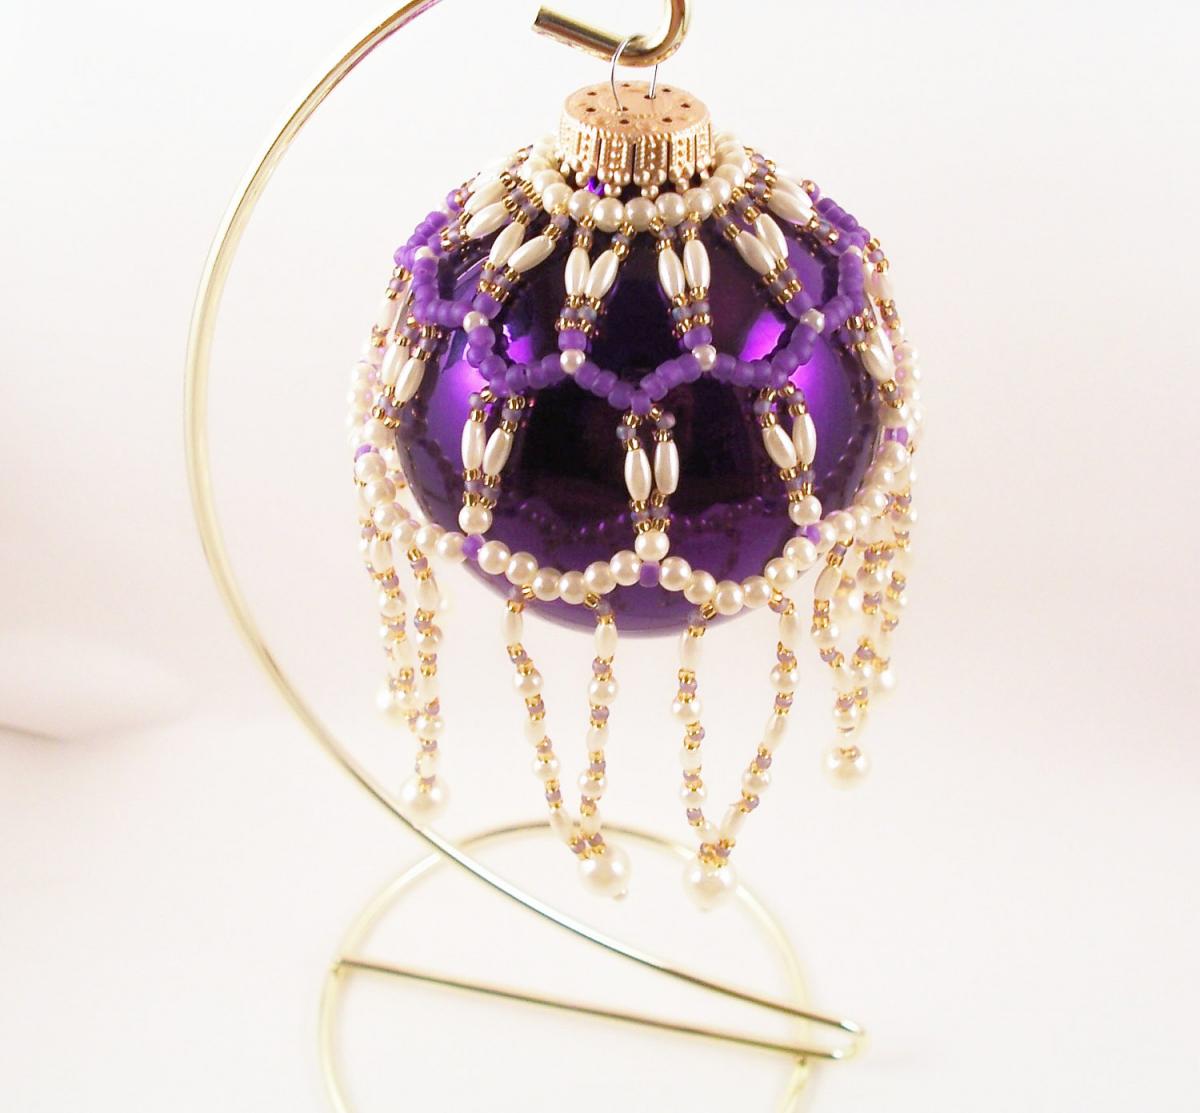 Pearl Ornament Cover Pattern, Beading Tutorial In Pdf